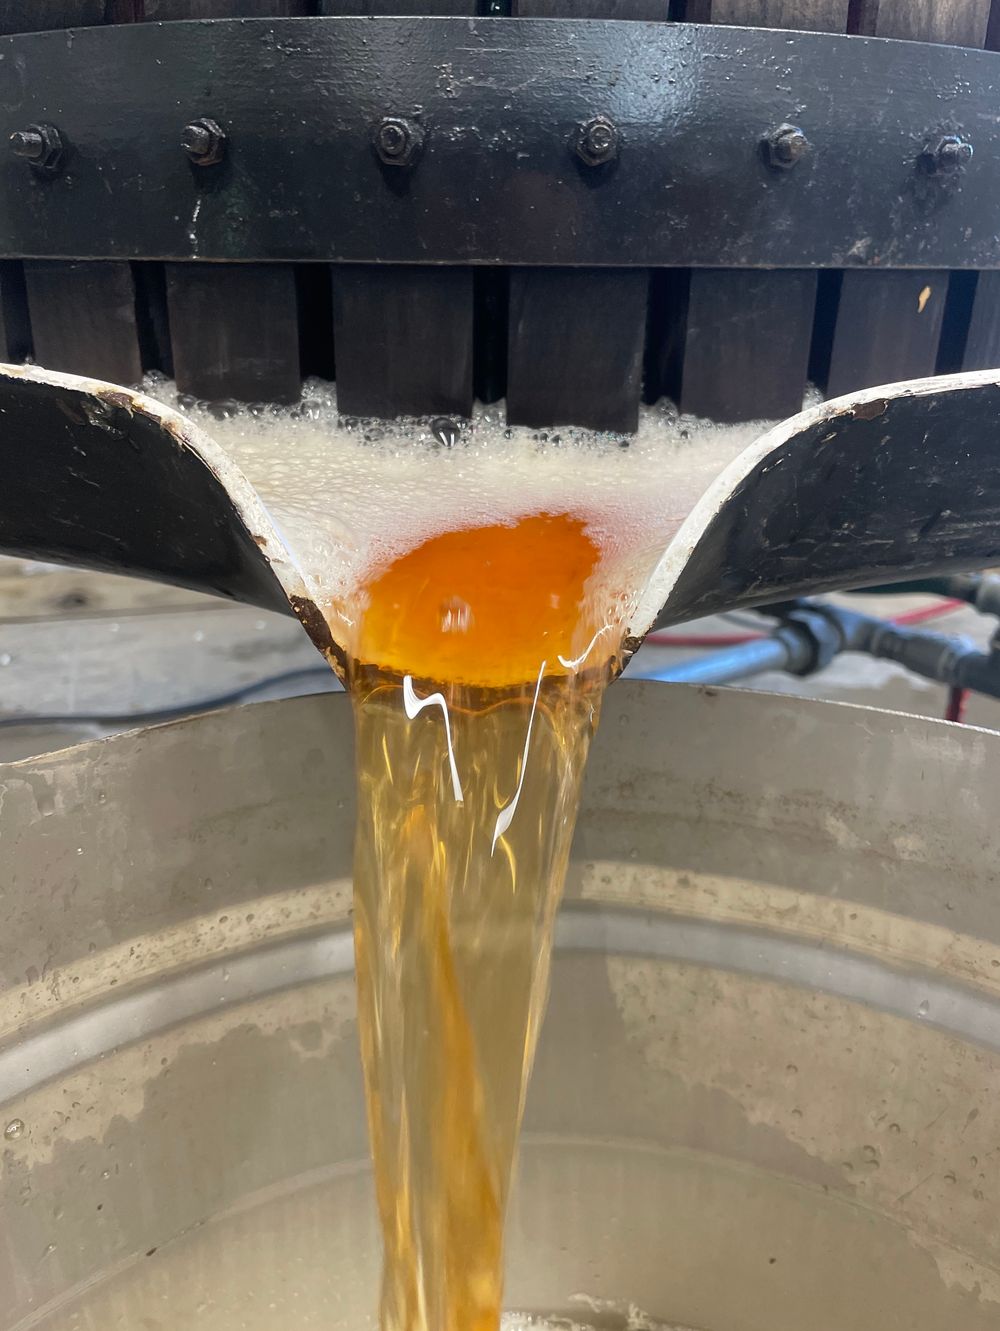 A golden colored cider pouring out of the press in a heavy stream, frothing before turning smooth liquid.